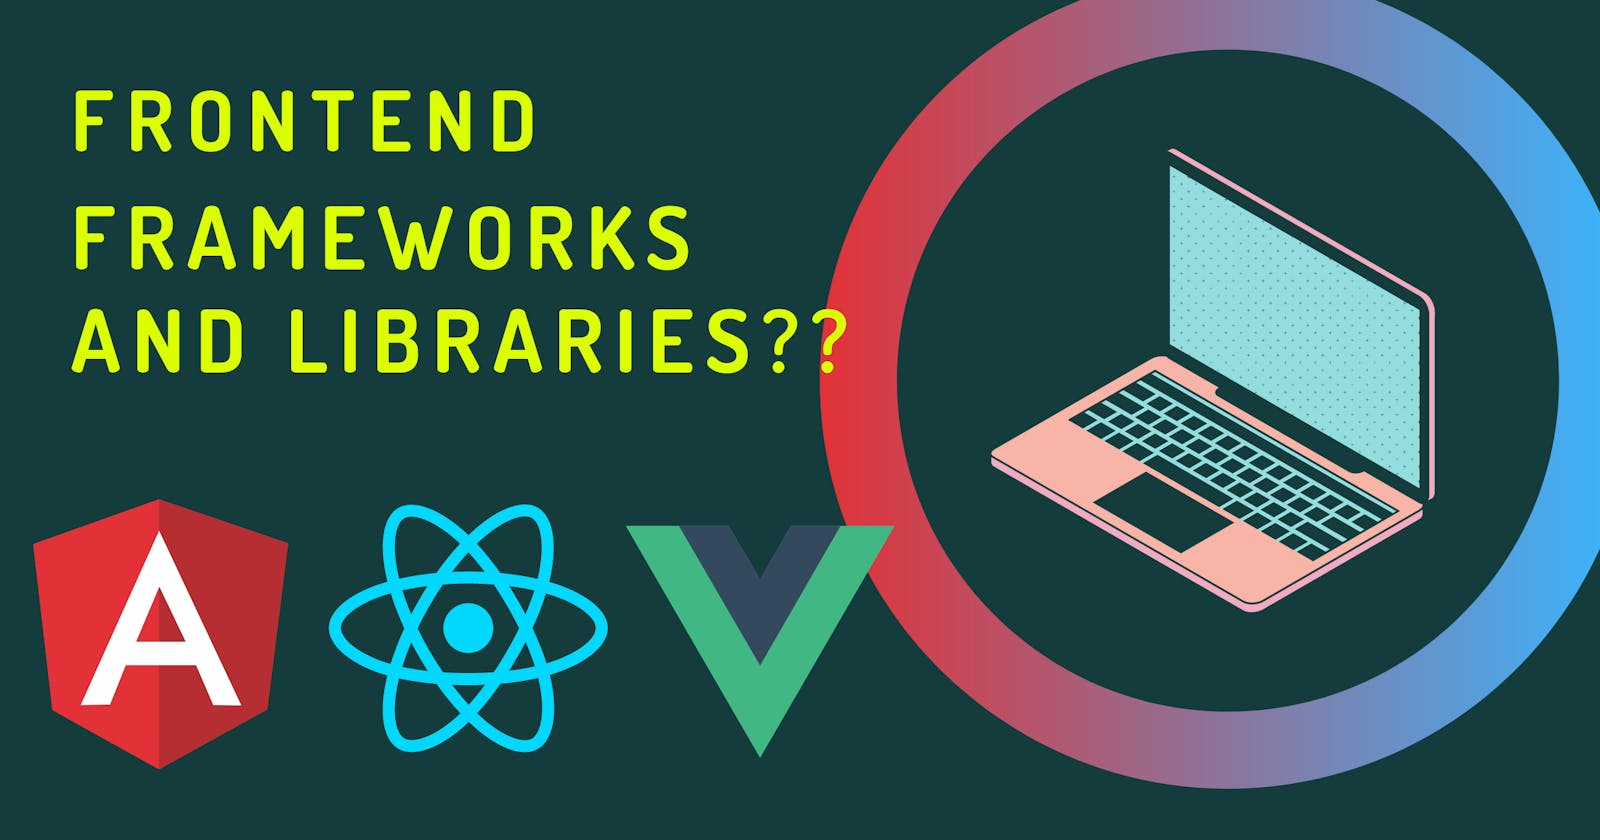 Now what?
Can I start learning frameworks
[Reactjs,Vue,Angular] if i know *** this?